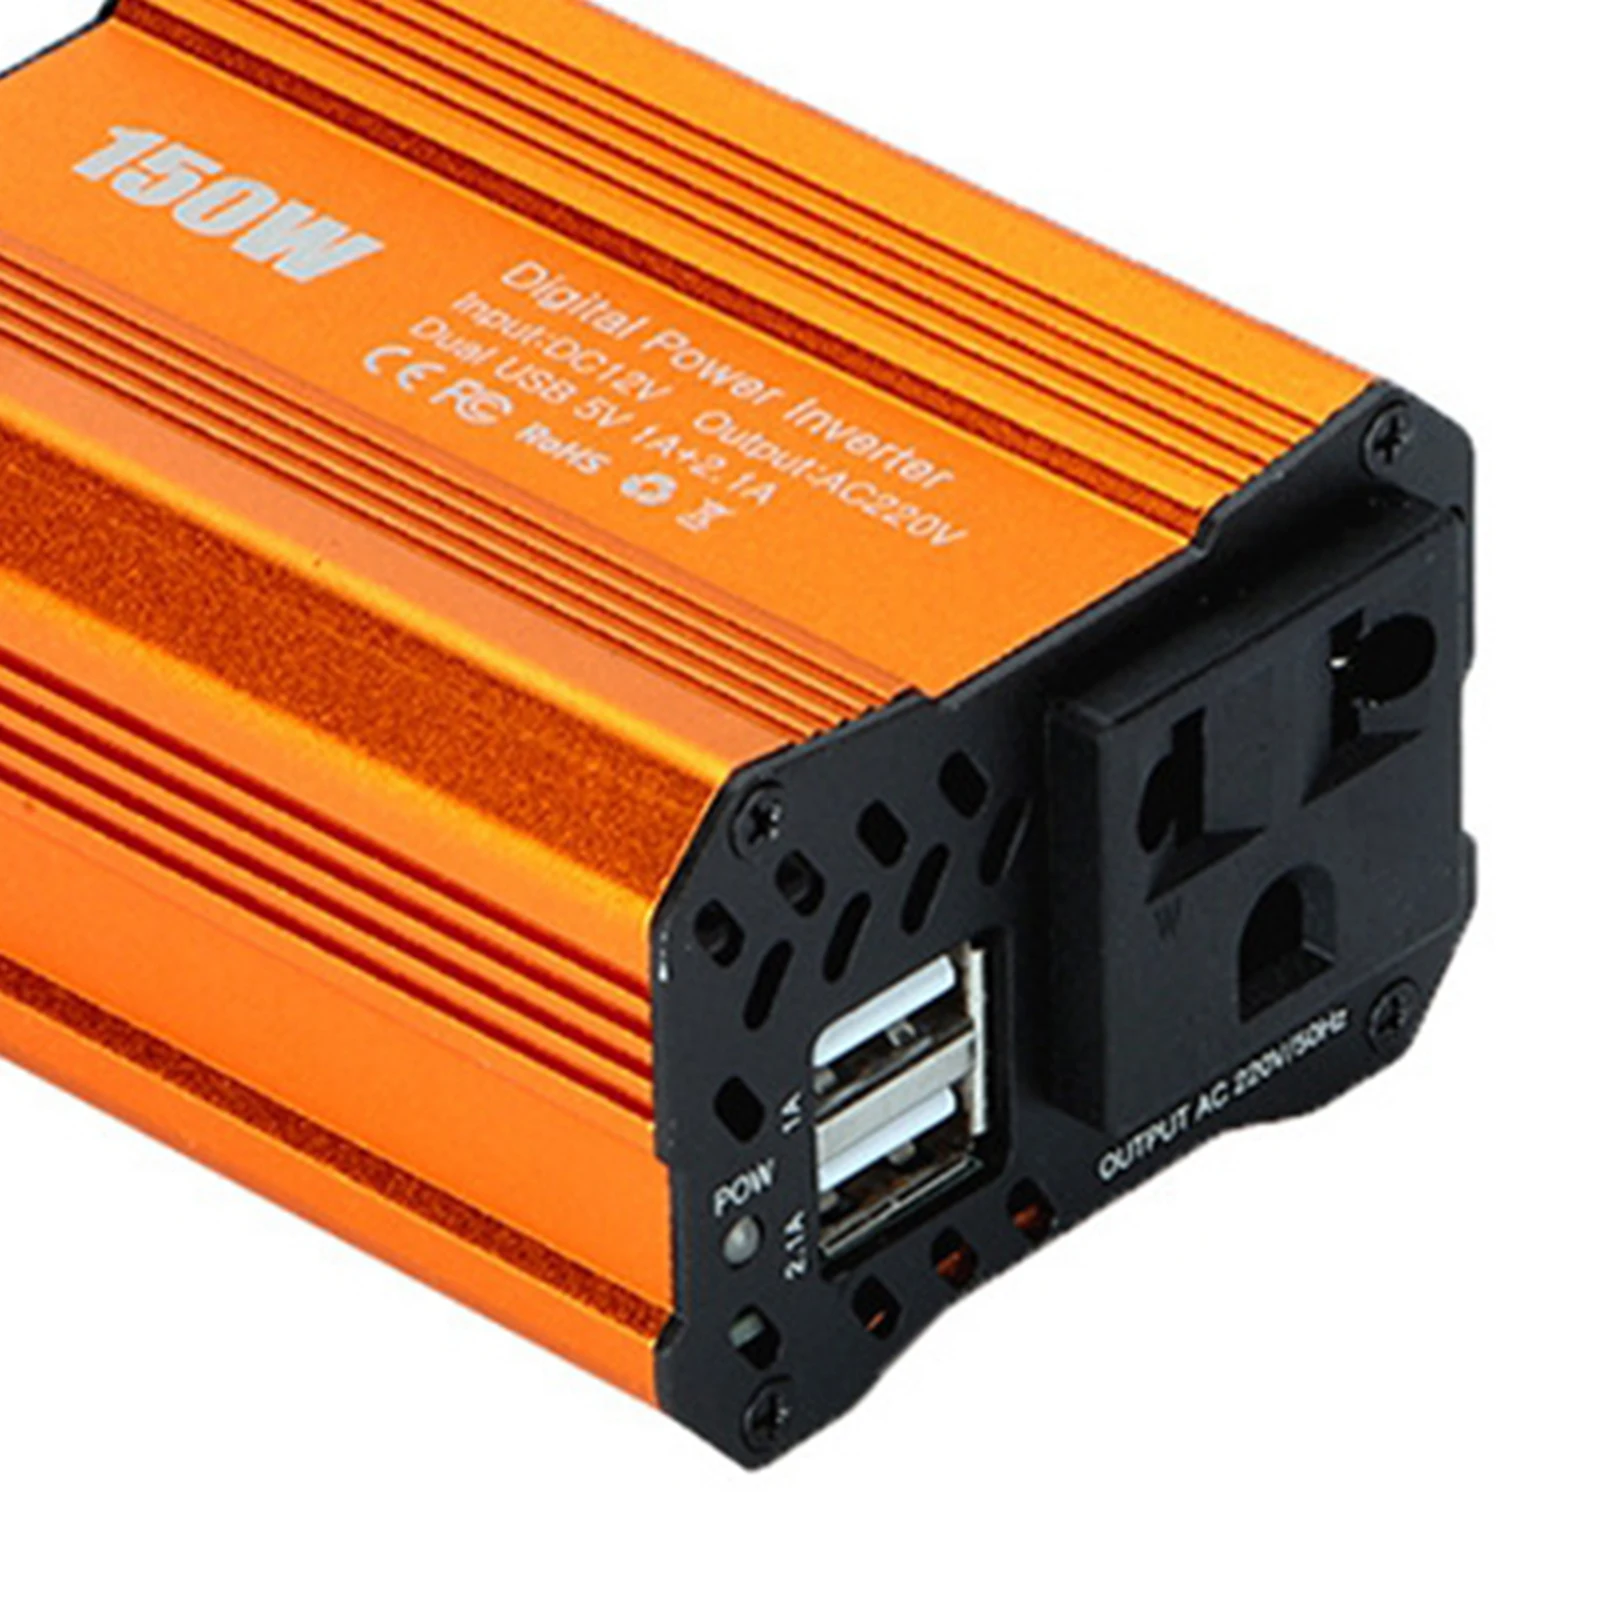 

150W Car Power Inverter inversor DC 12V To AC 220V 2.1A Dual USB Ports Car Charger Adapter